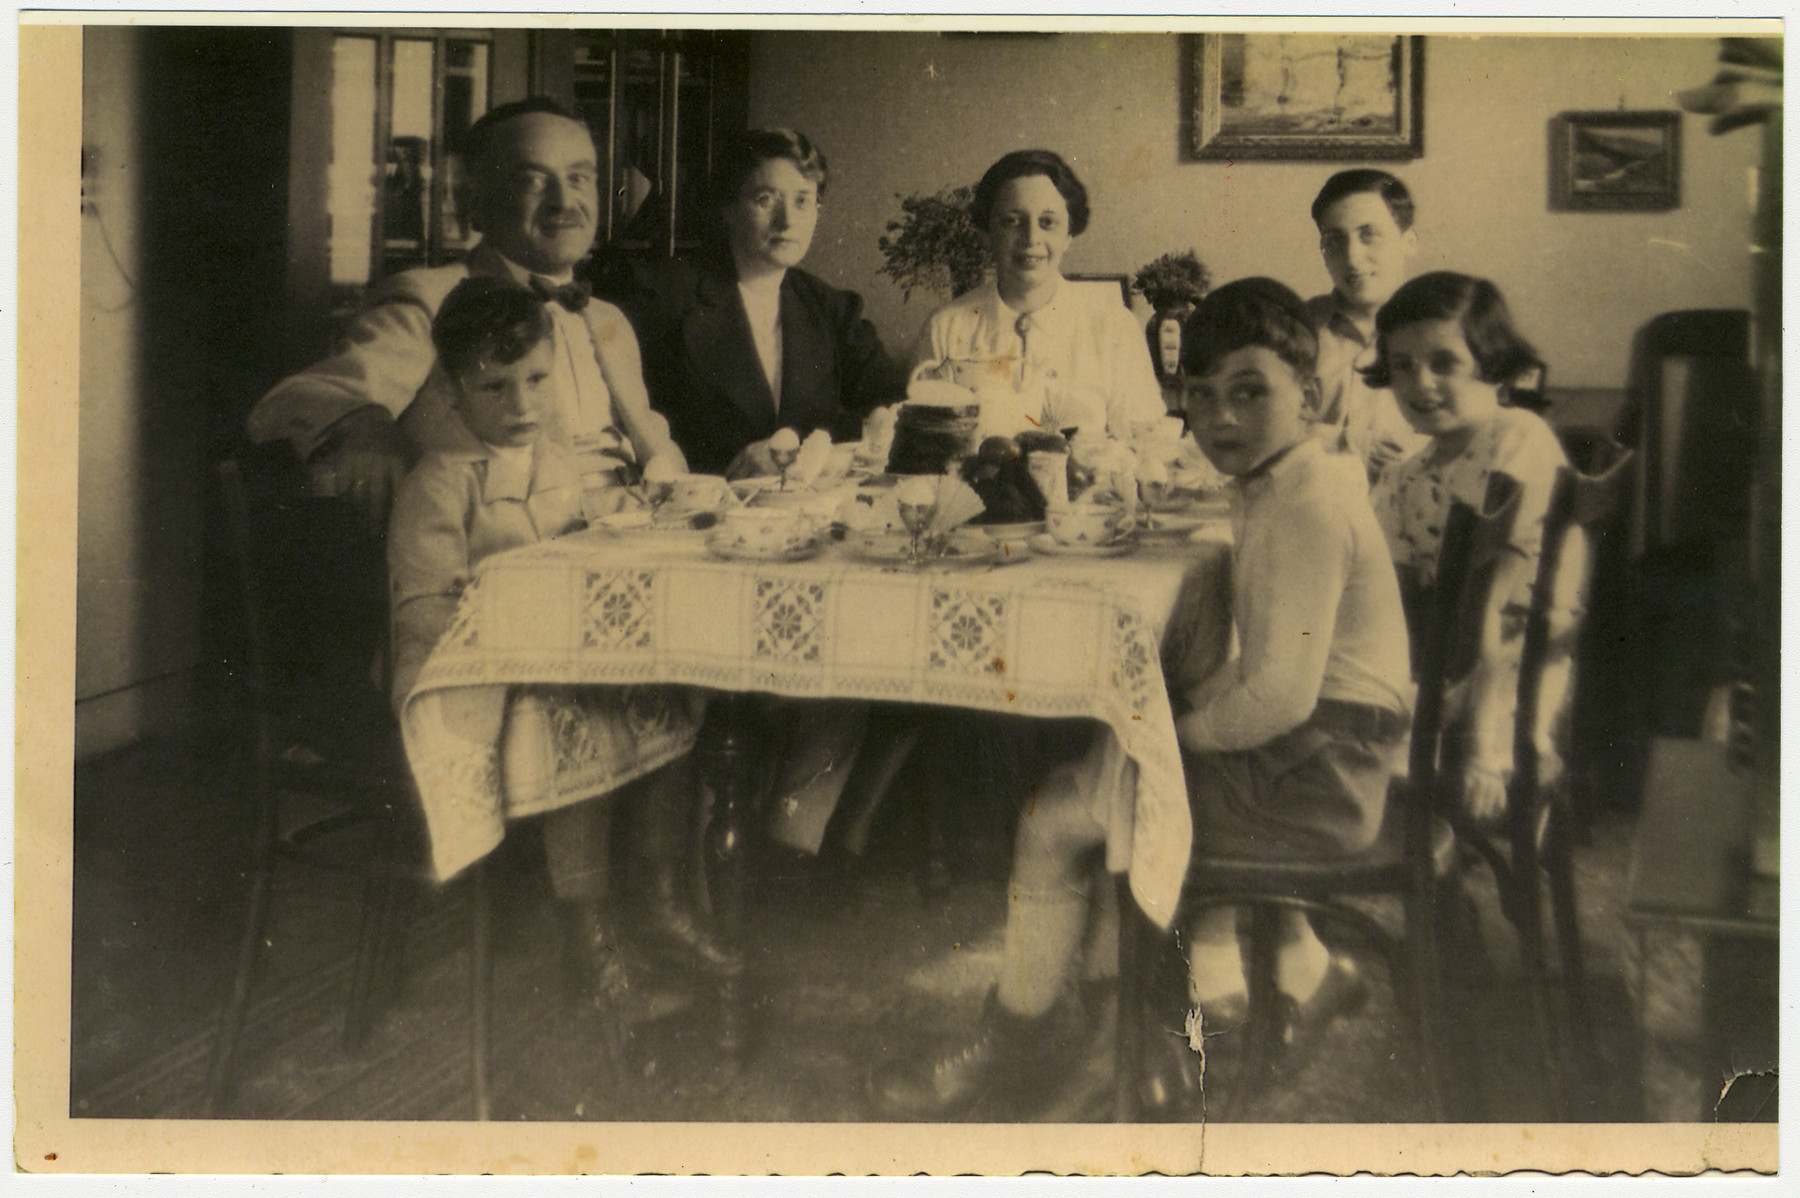 A German-Jewish father and his two sons visit with Belgium relatives.

Pictured in the left front are Manfred and Alfred Manasse.  Opposite them is Gustav Manasse.